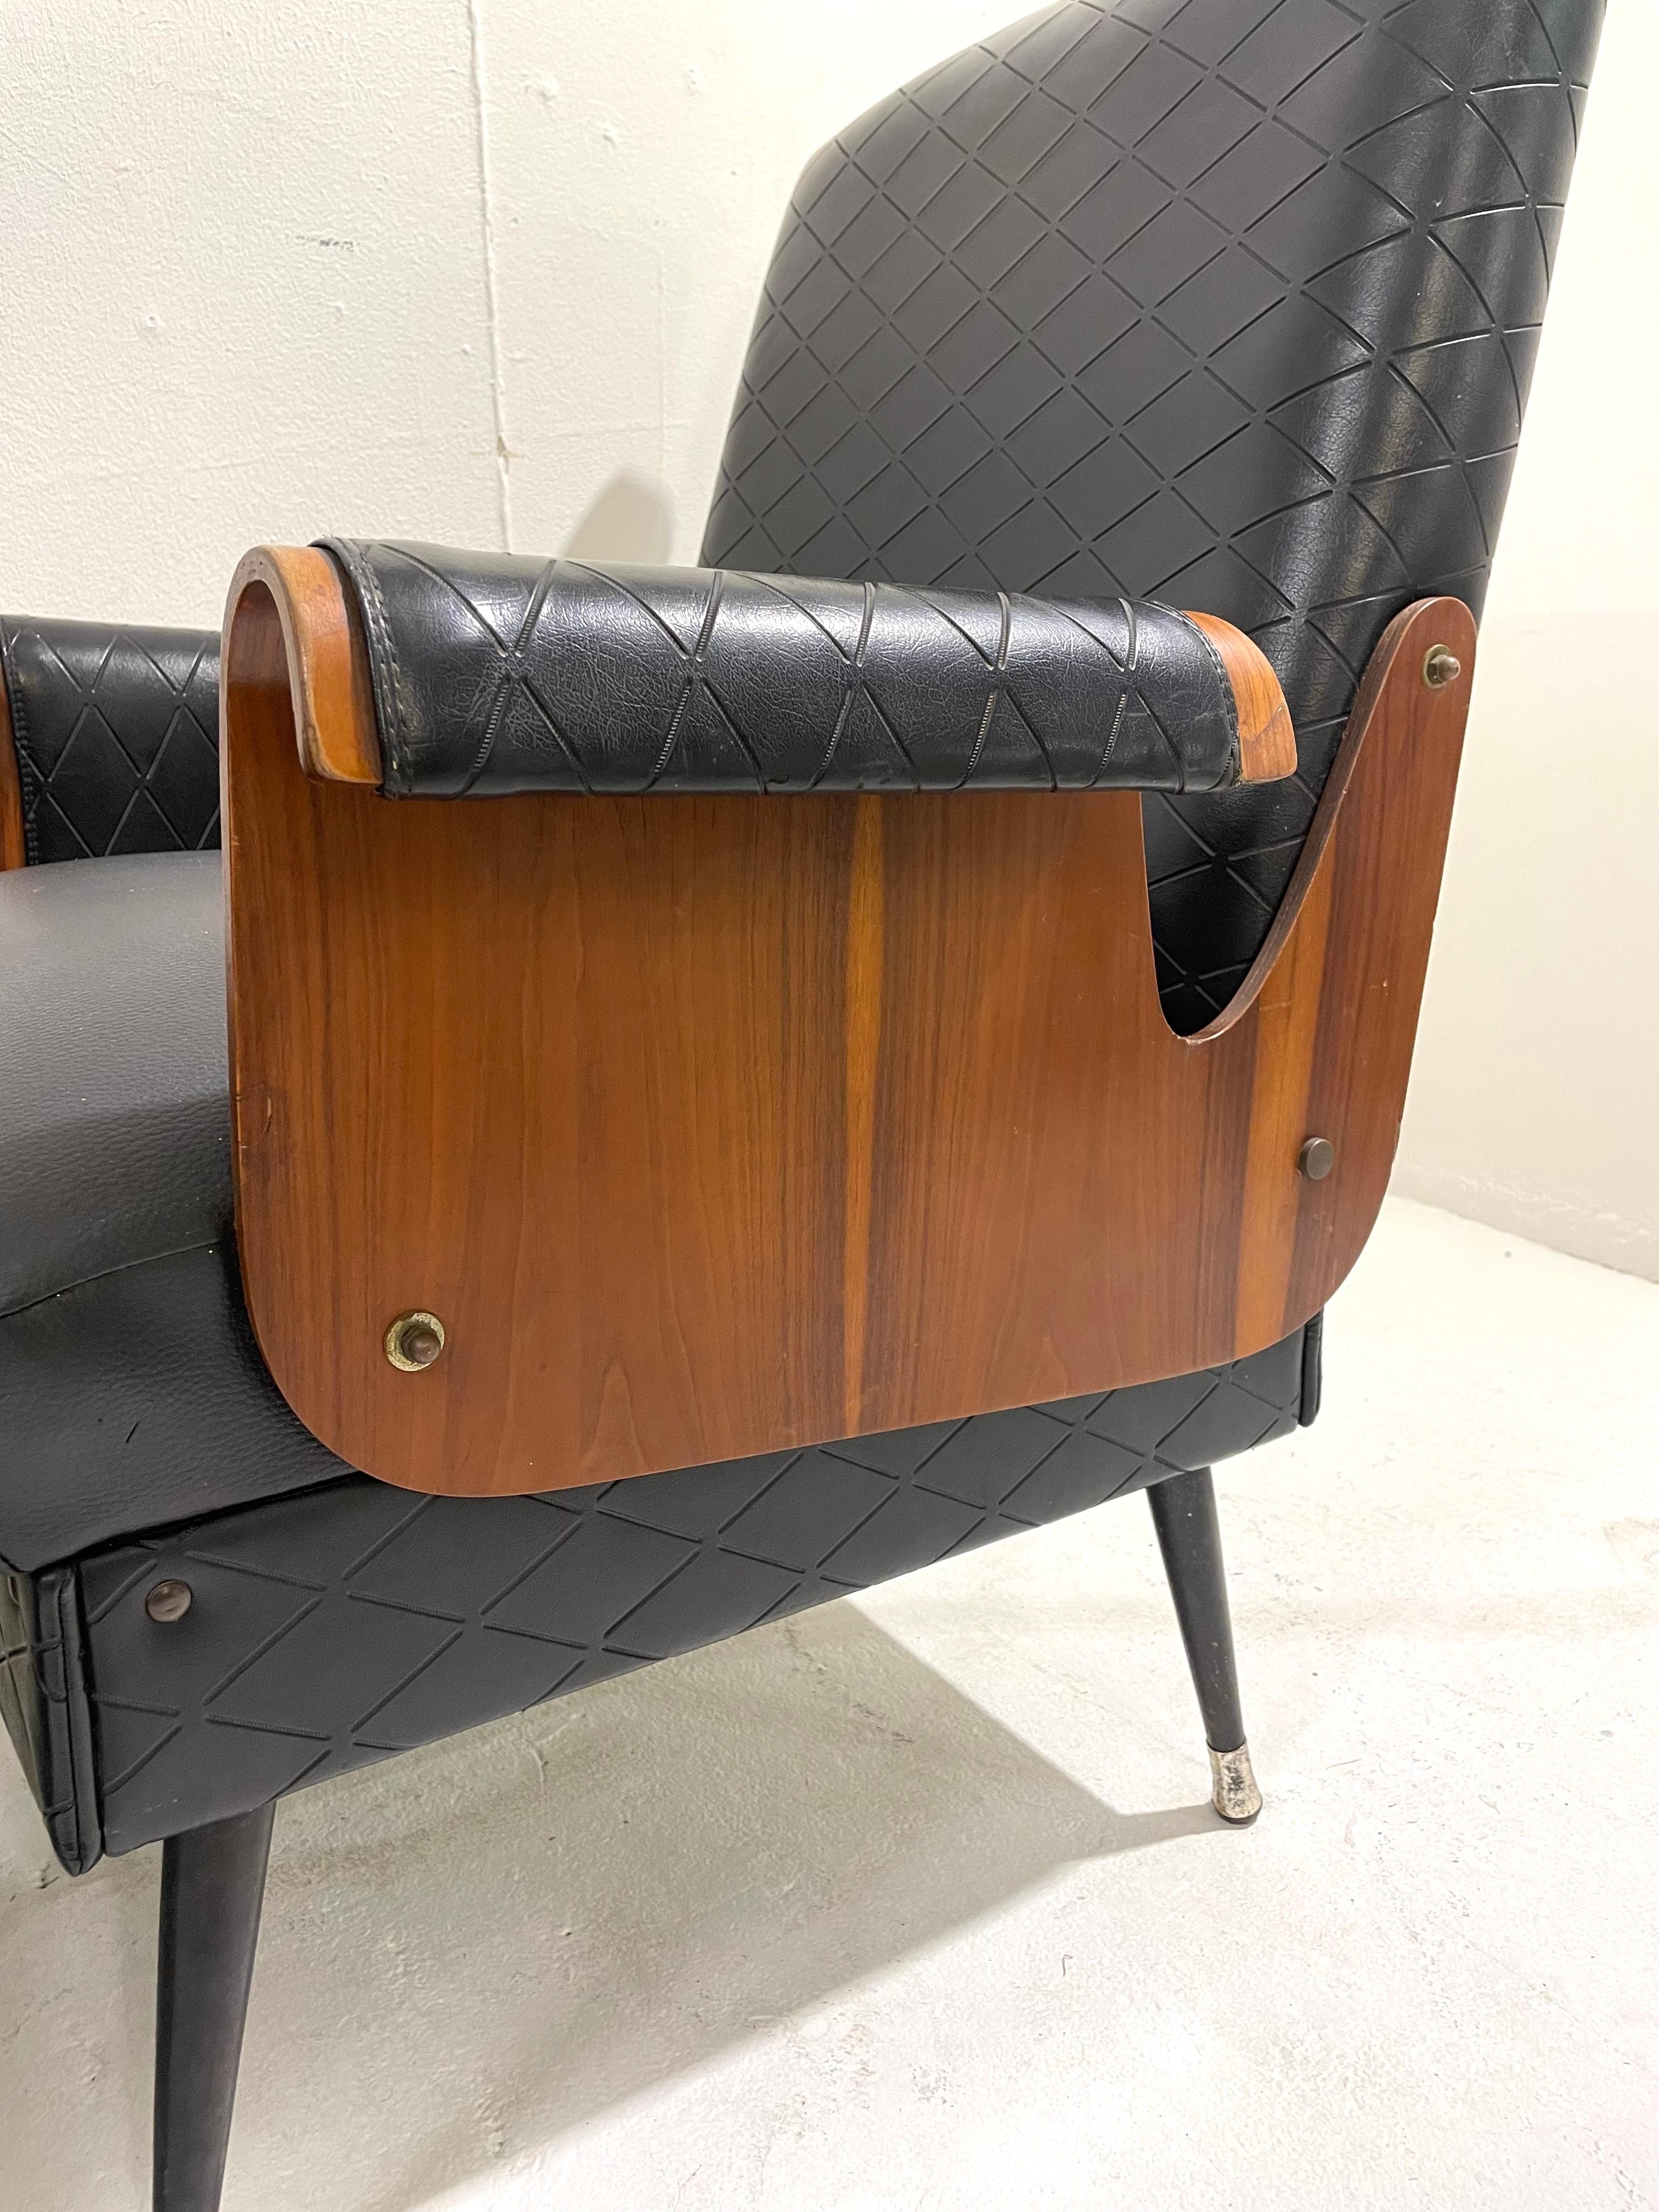 Pair of Mid-Century Modern Armchairs, Walnut and Vegan Leather, Italy, 1960s For Sale 1